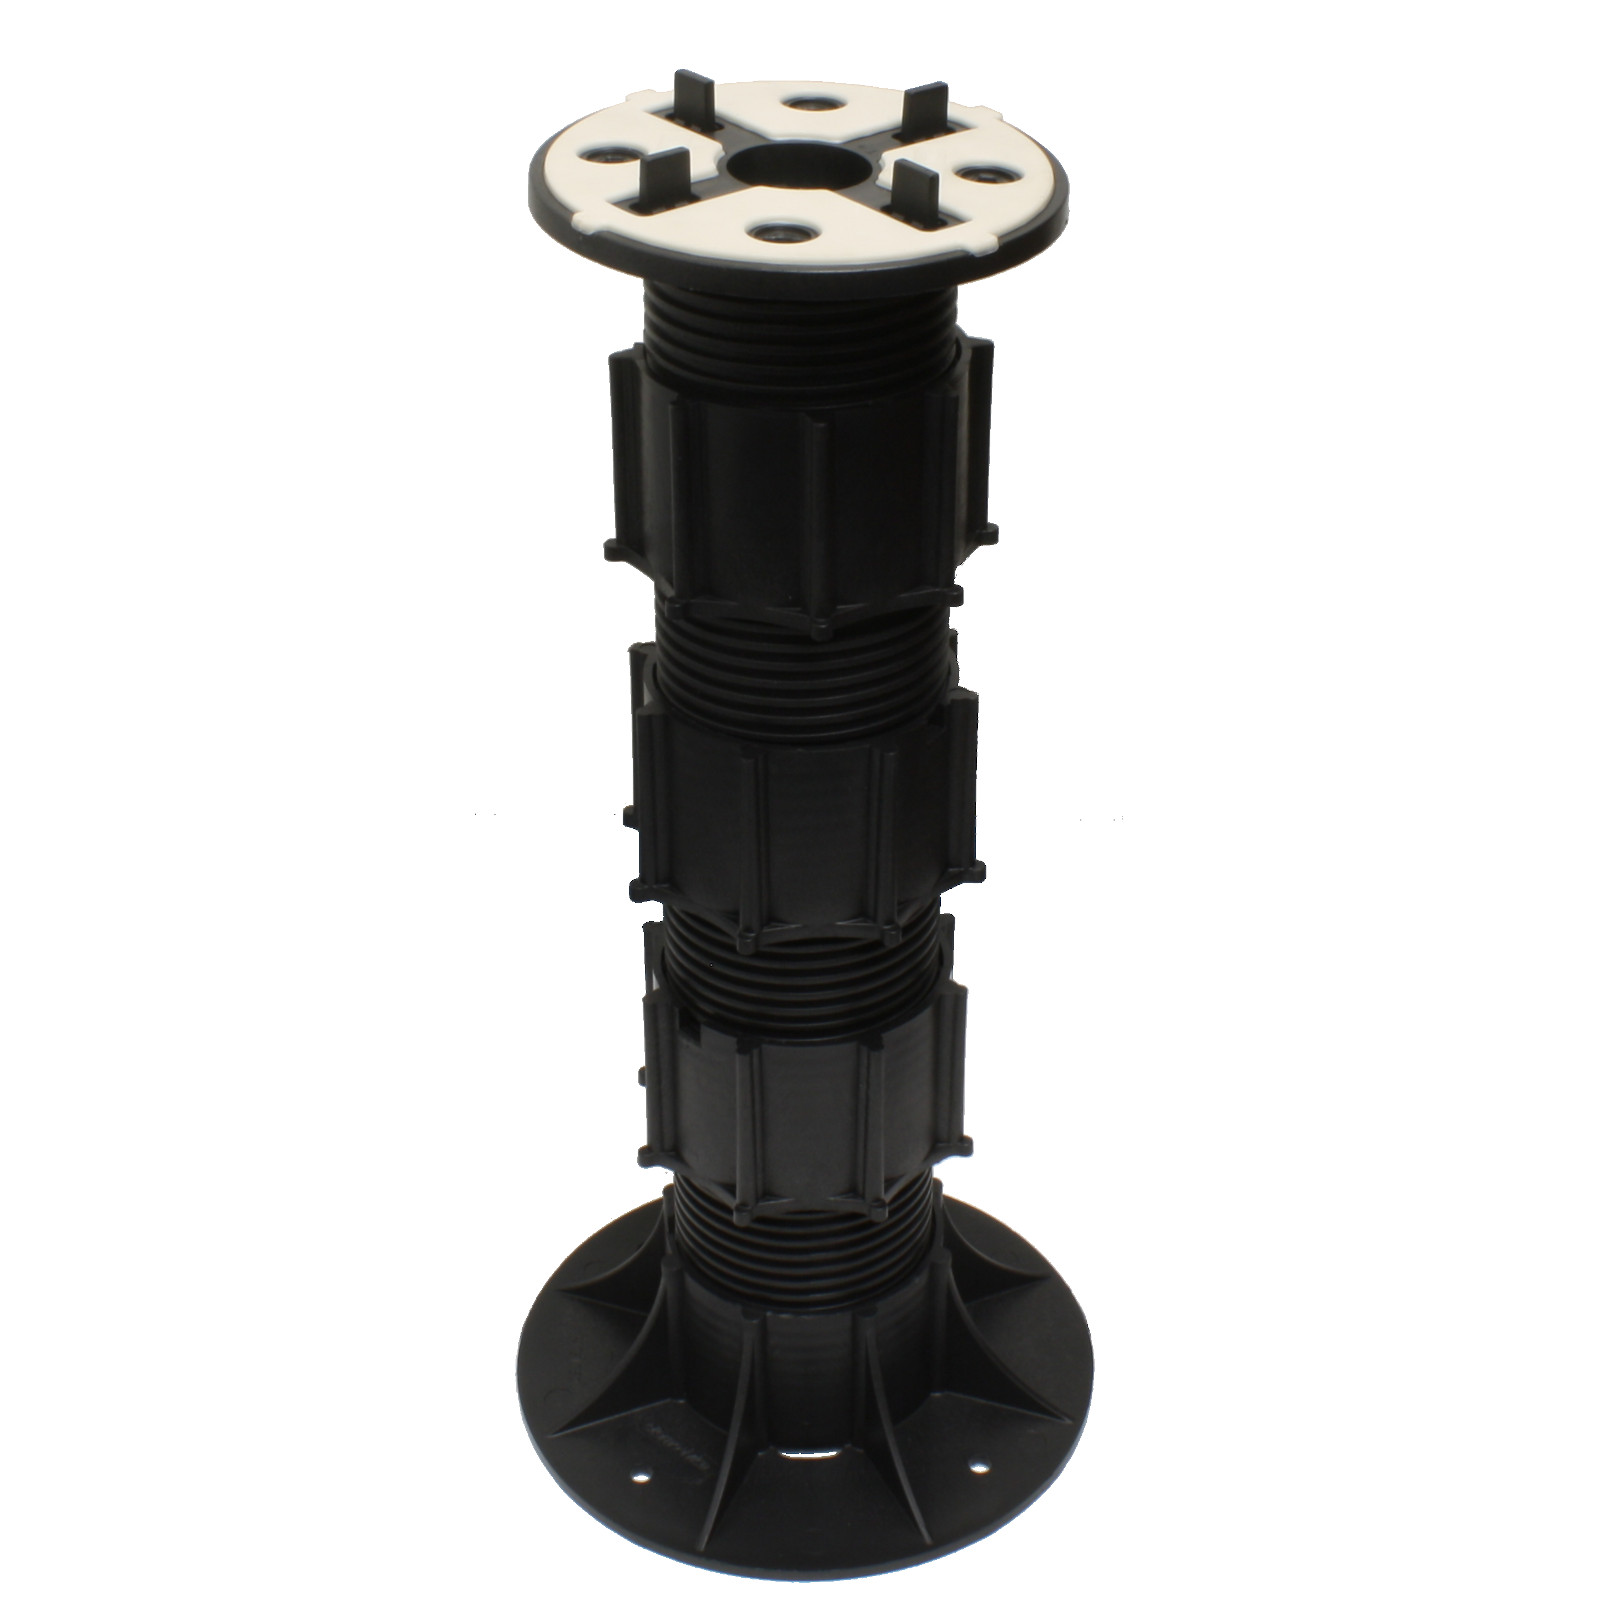 SE12 Adj Ped Support w/ Three-in-One Self Leveling Head 10.5” ‐ 18” (270‐455Mm)